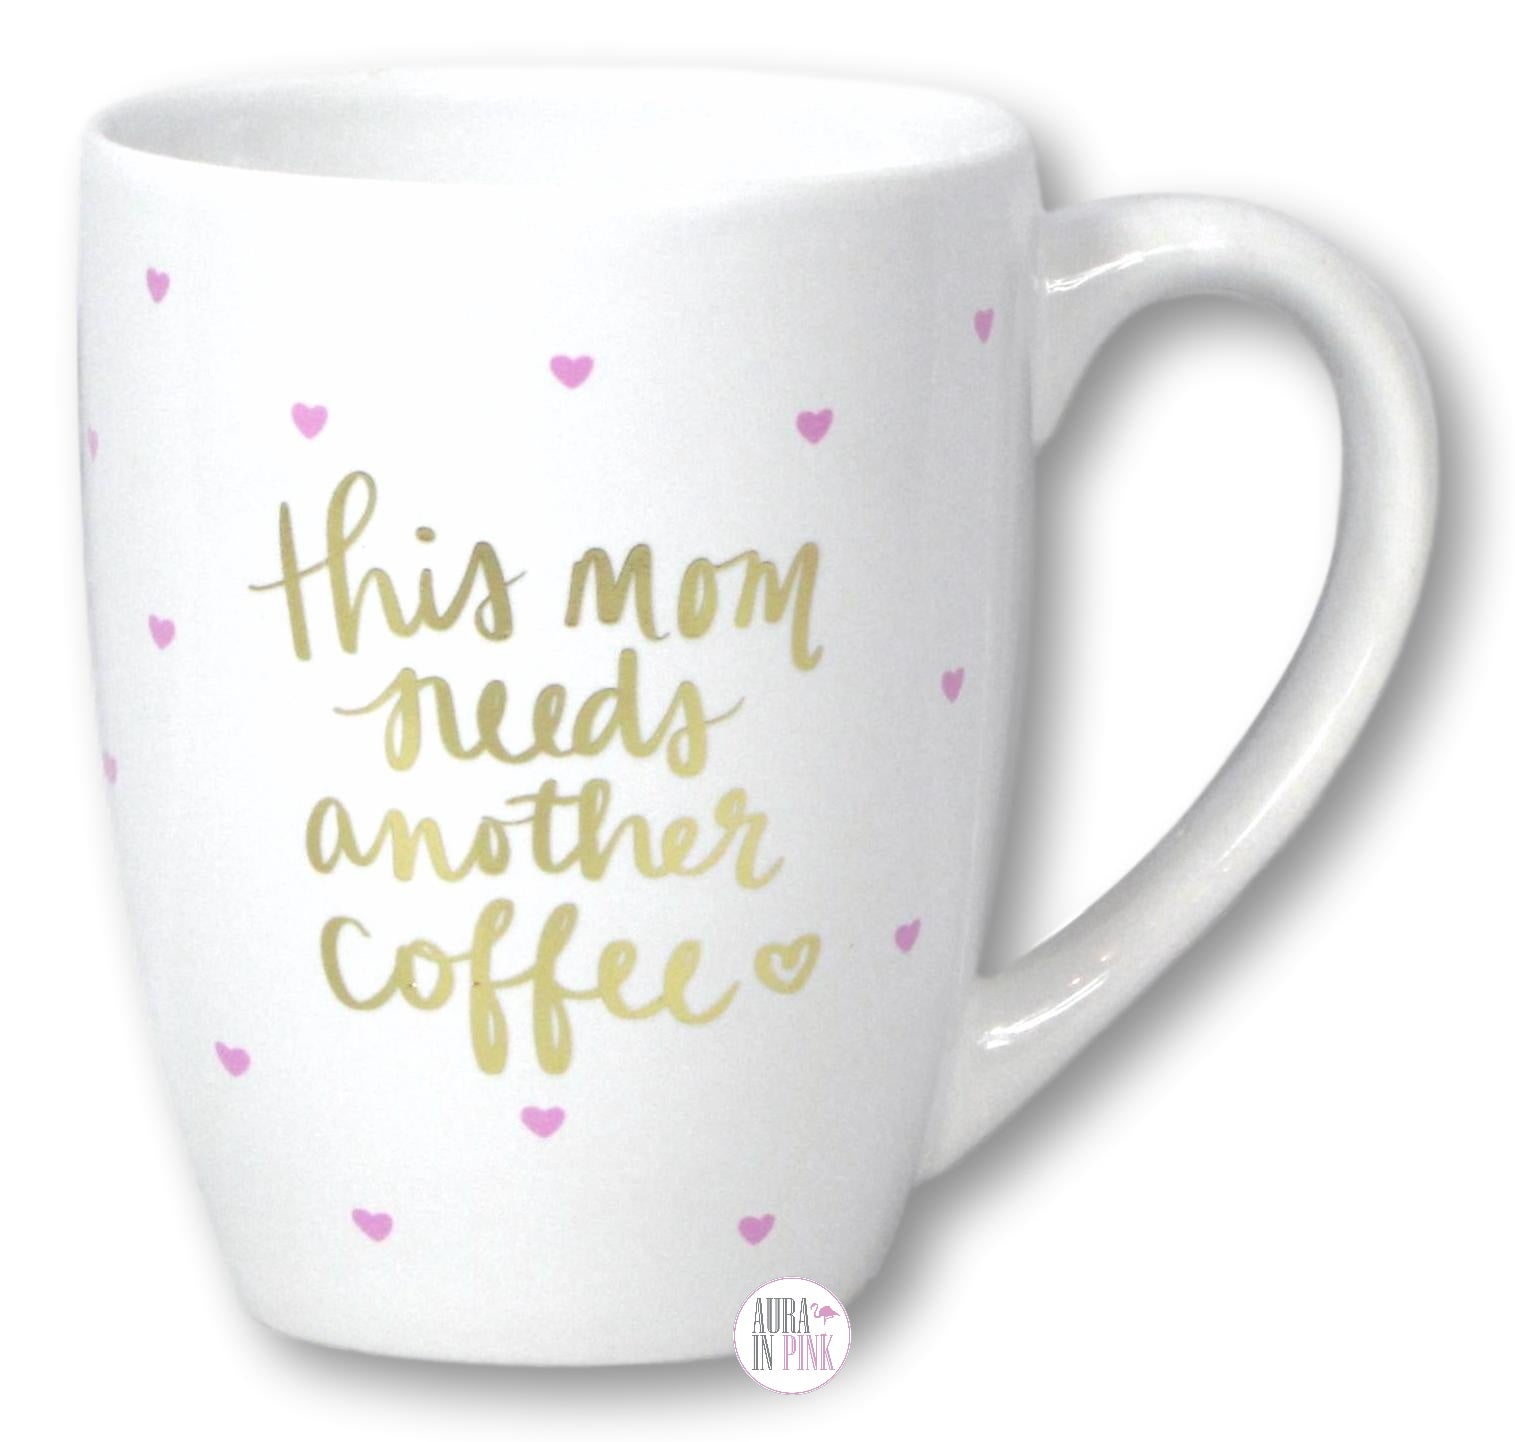 Mom Mode All Day Every Day Frosted Glass Cup – Natalia's Design Studio